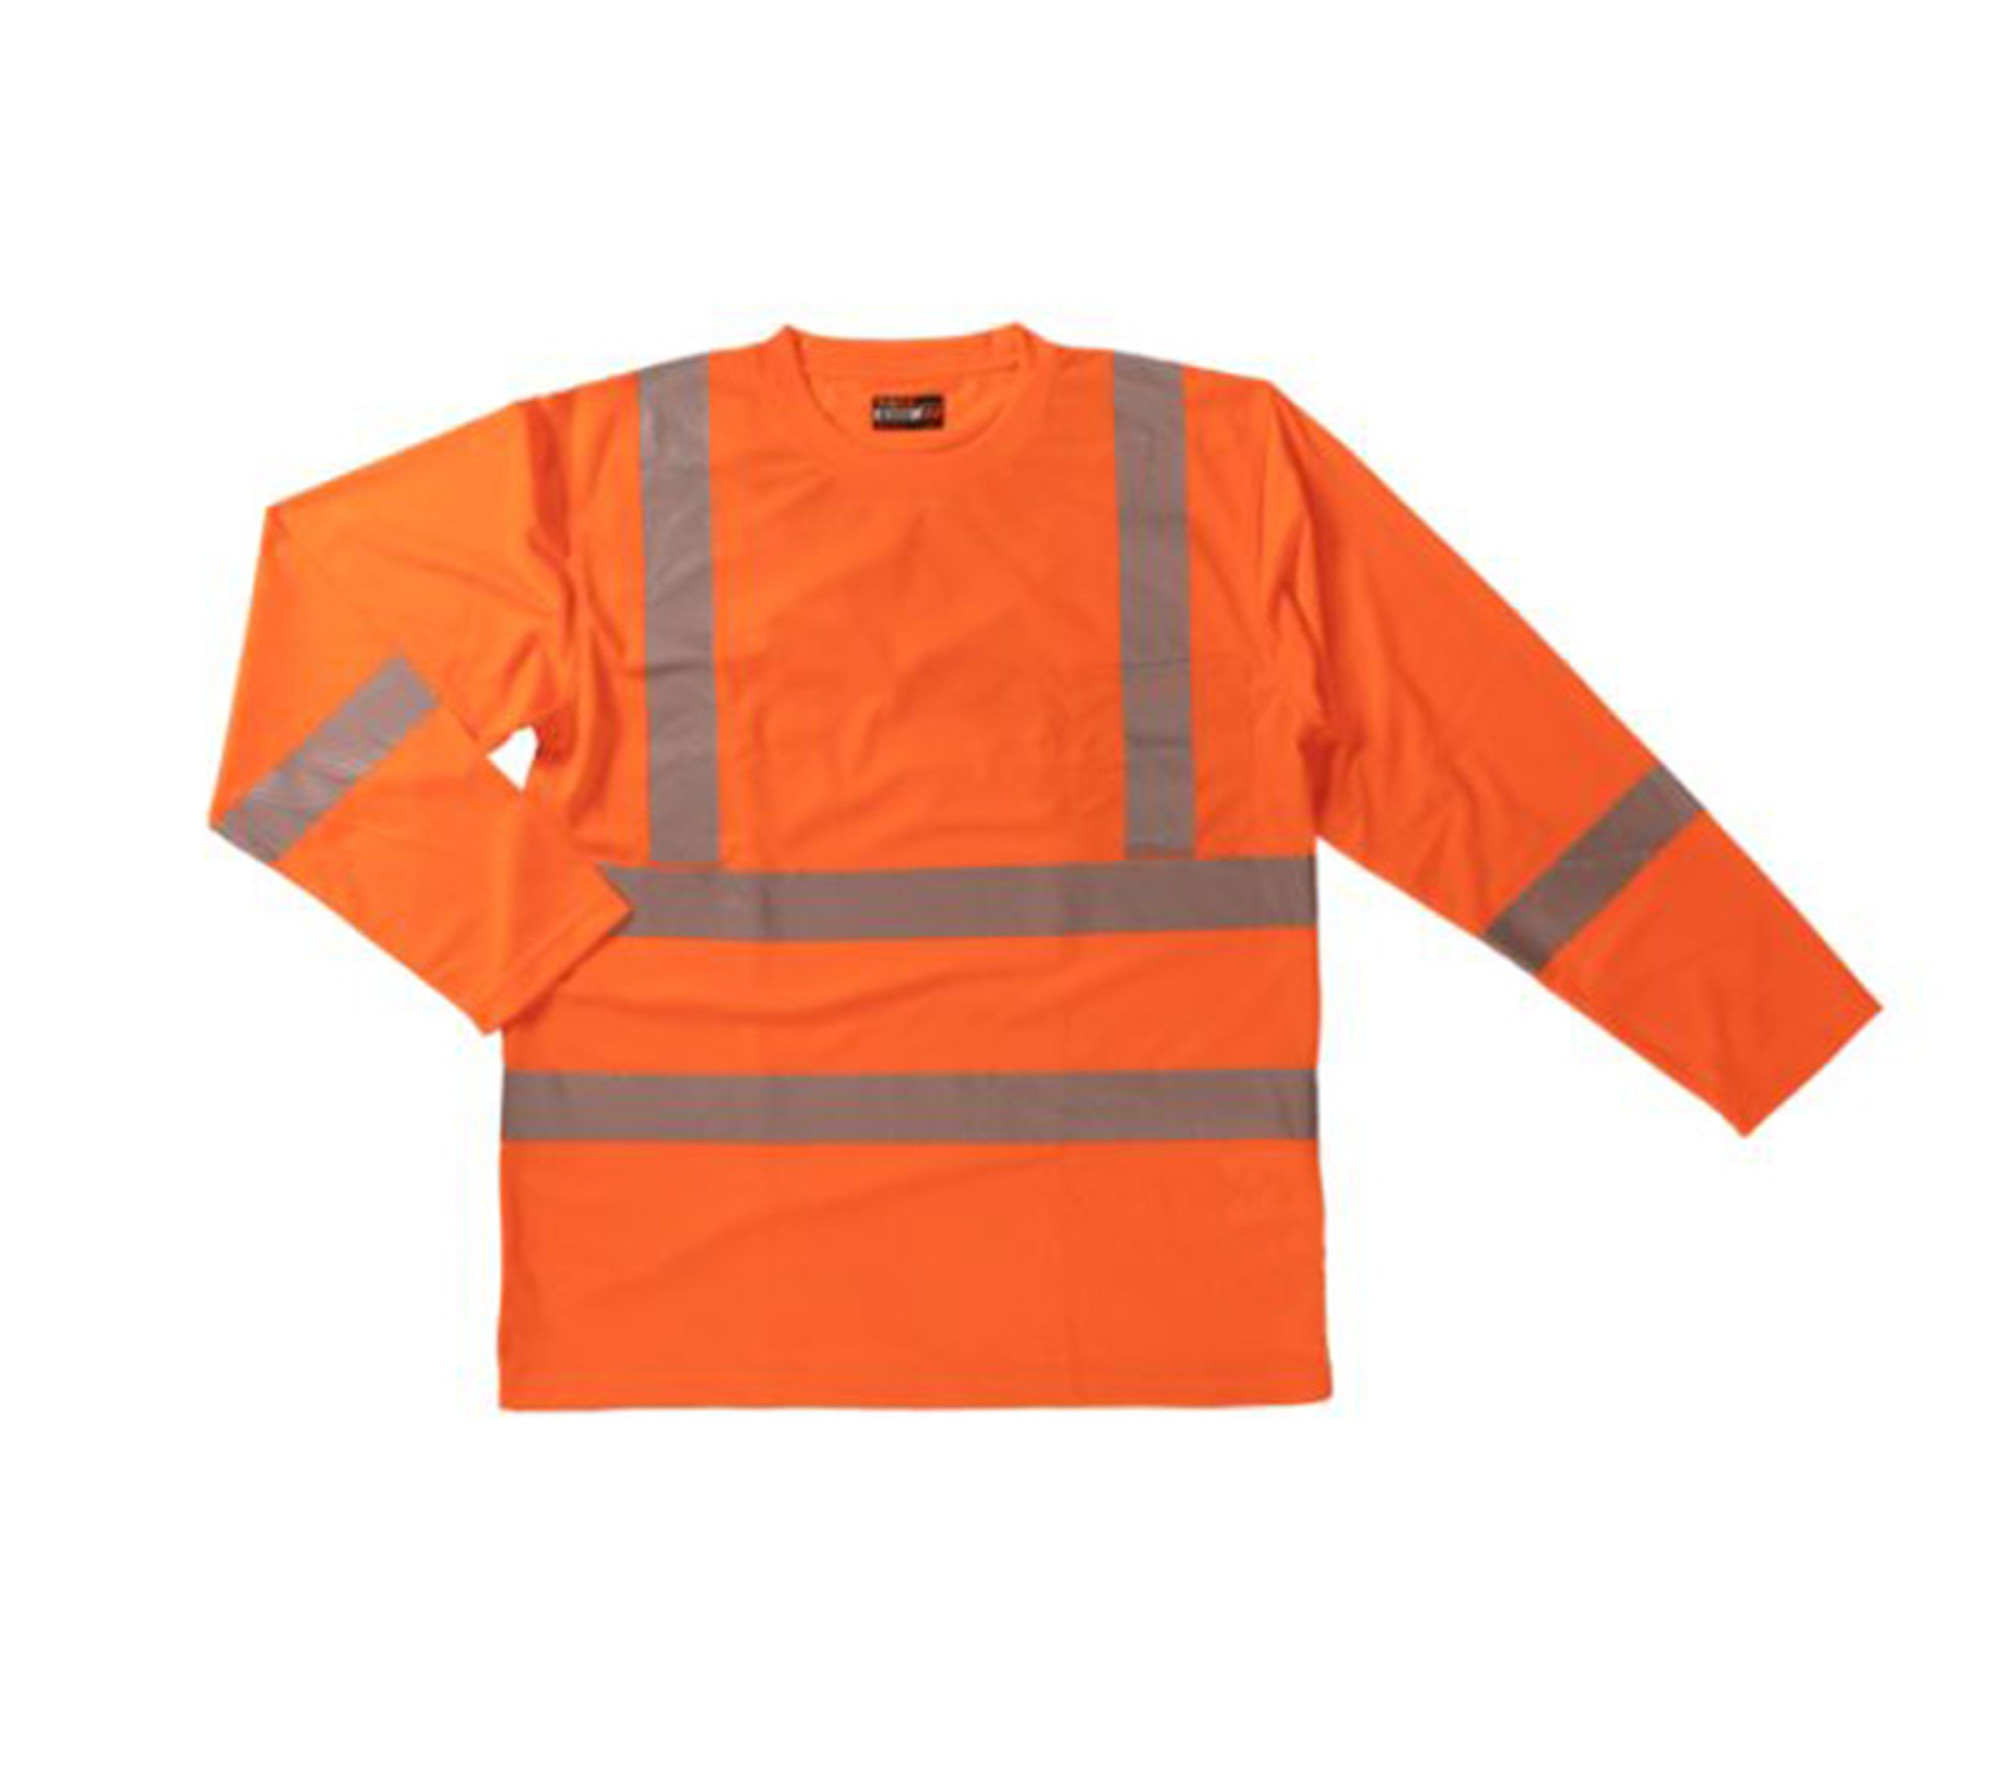 L/S Safety T-Shirt with Segmented Stripes (Fluorescent Orange) - 3 Pack